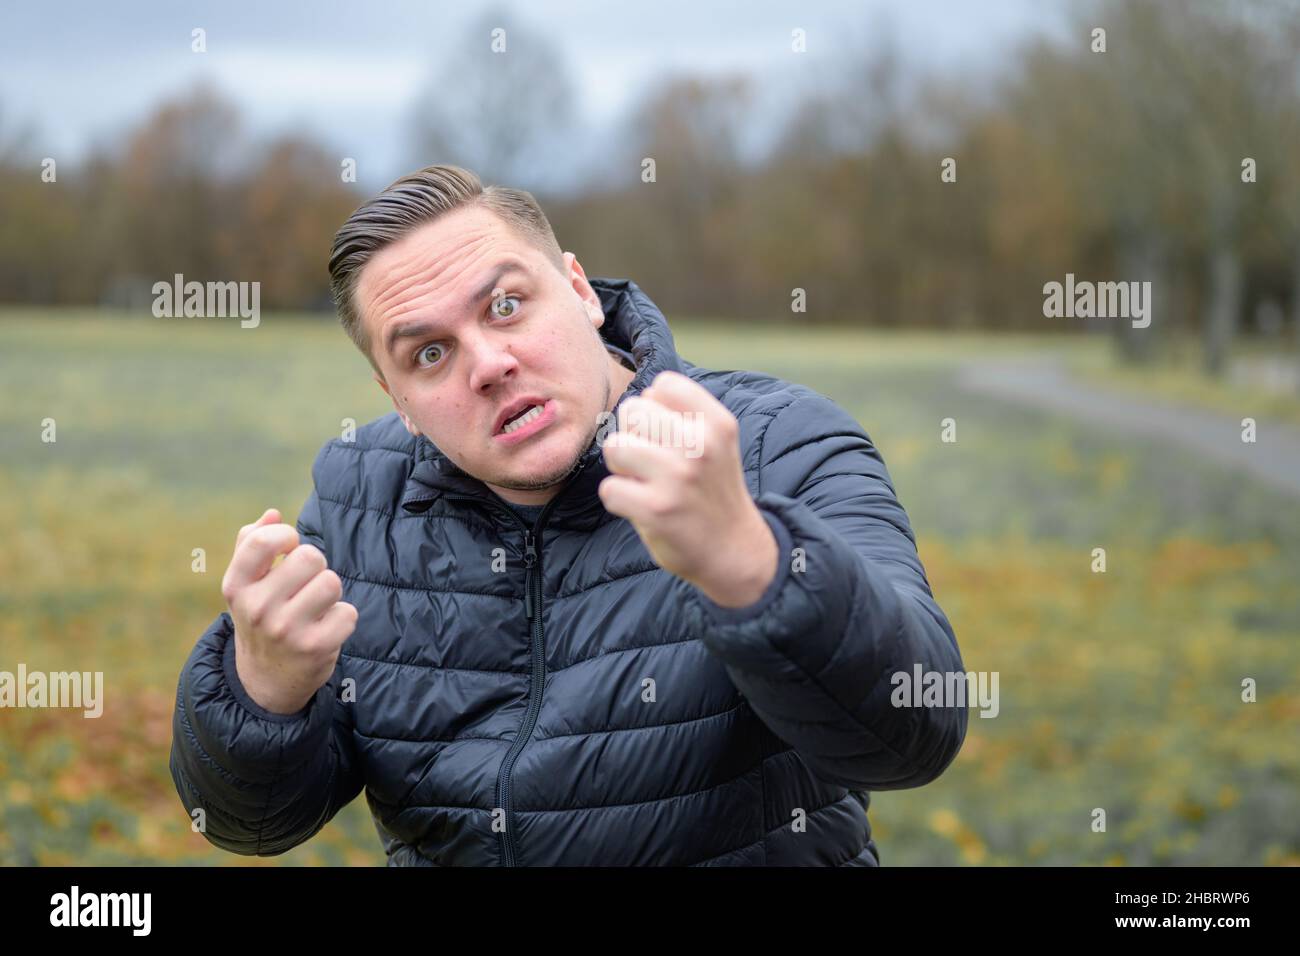 Aggressive angry young man threatening the camera with raised clenched fists as he snarls in fury outdoors in a park Stock Photo